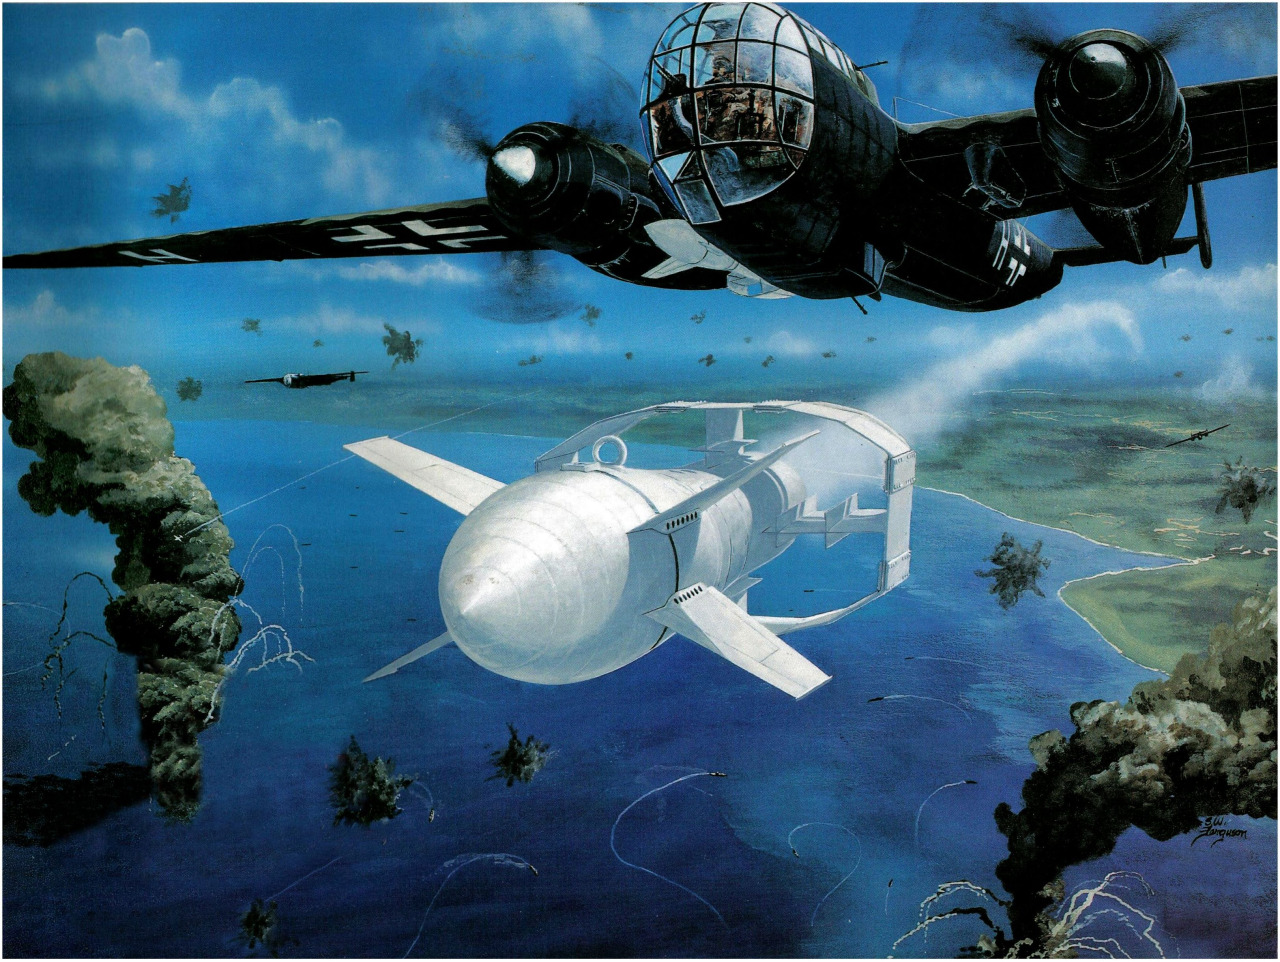 Depiction of the Dornier Do-217M Fritz X attack on Italian battleship Roma. The glide bomb had a flare in its tail to allow the bombardier to guide it to its target from upto 5km away